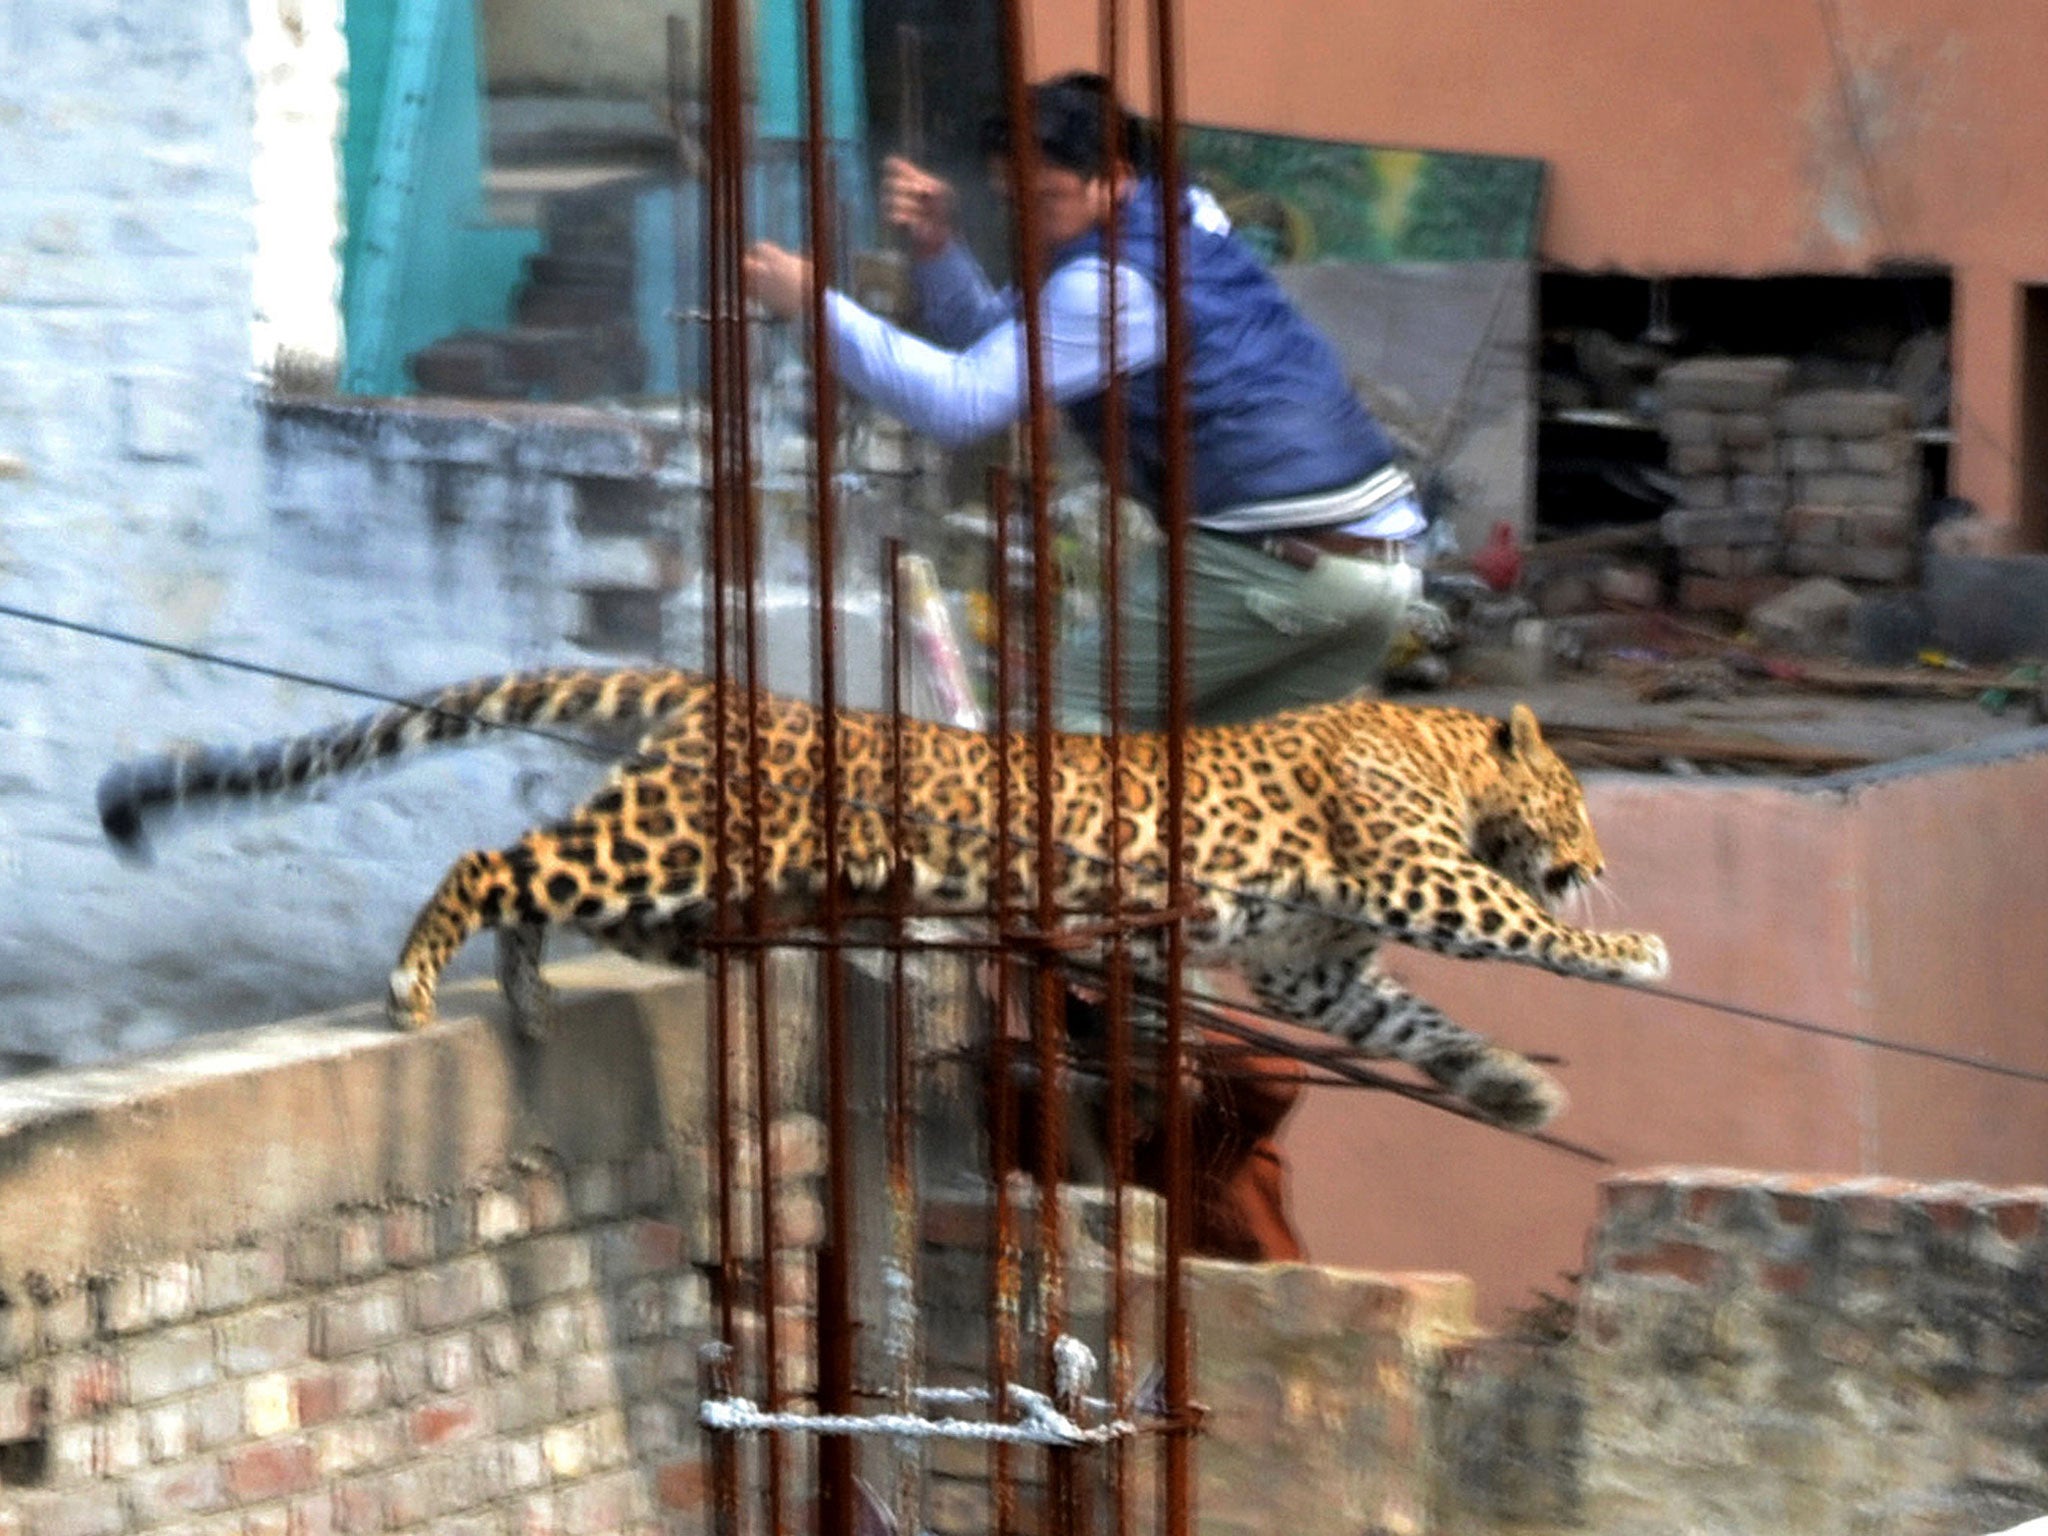 A leopard on the loose has caused panic in the city of Meerut